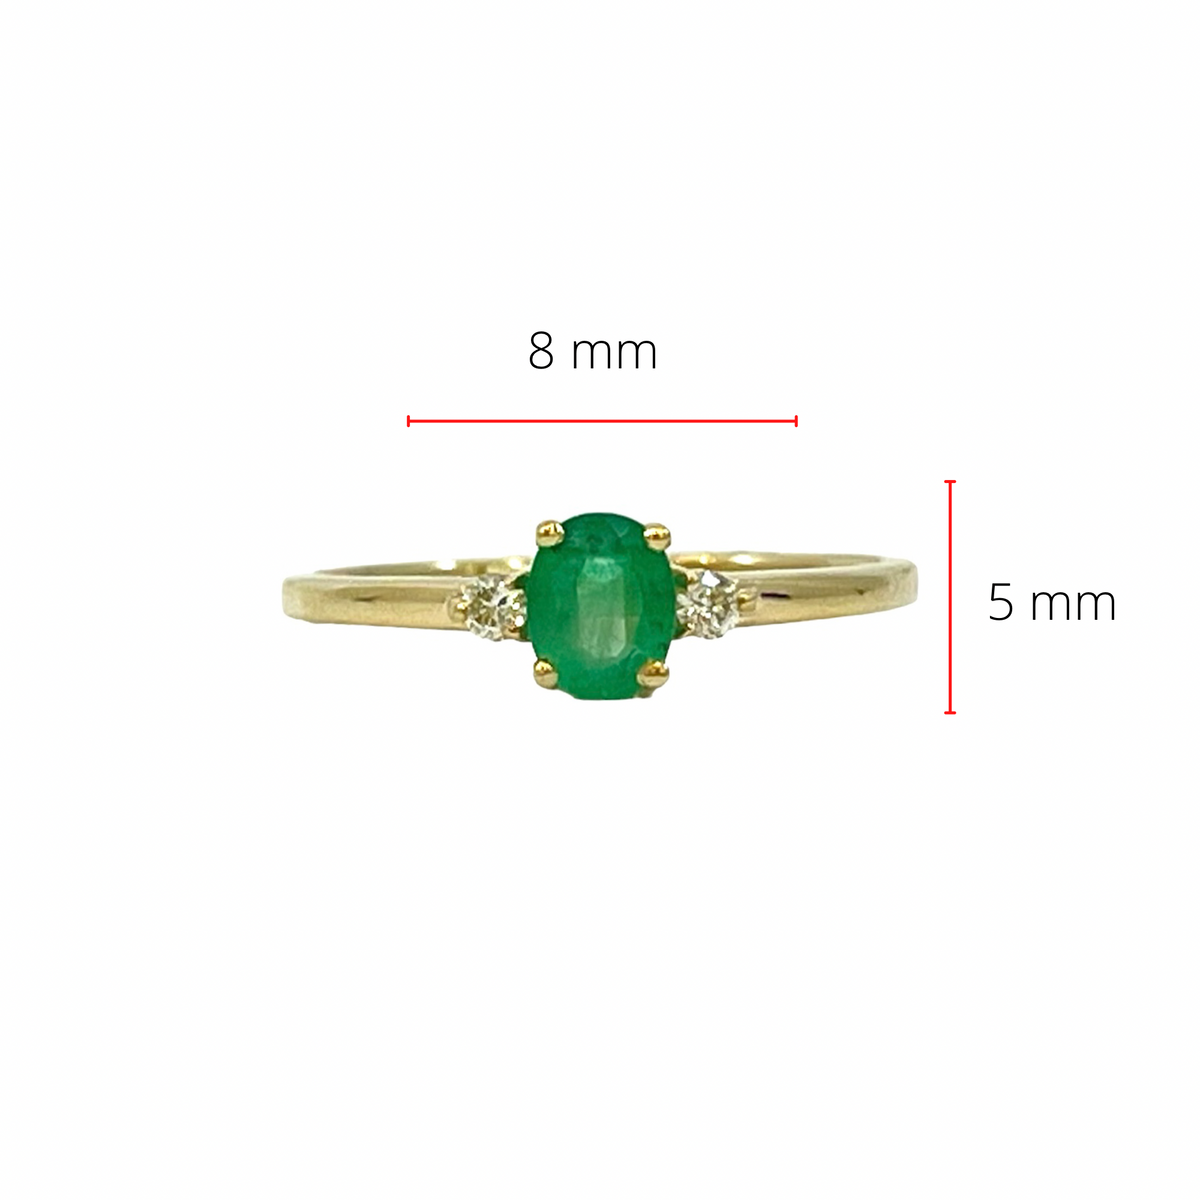 10K Yellow Gold Emerald and Diamond Ring - Size 6